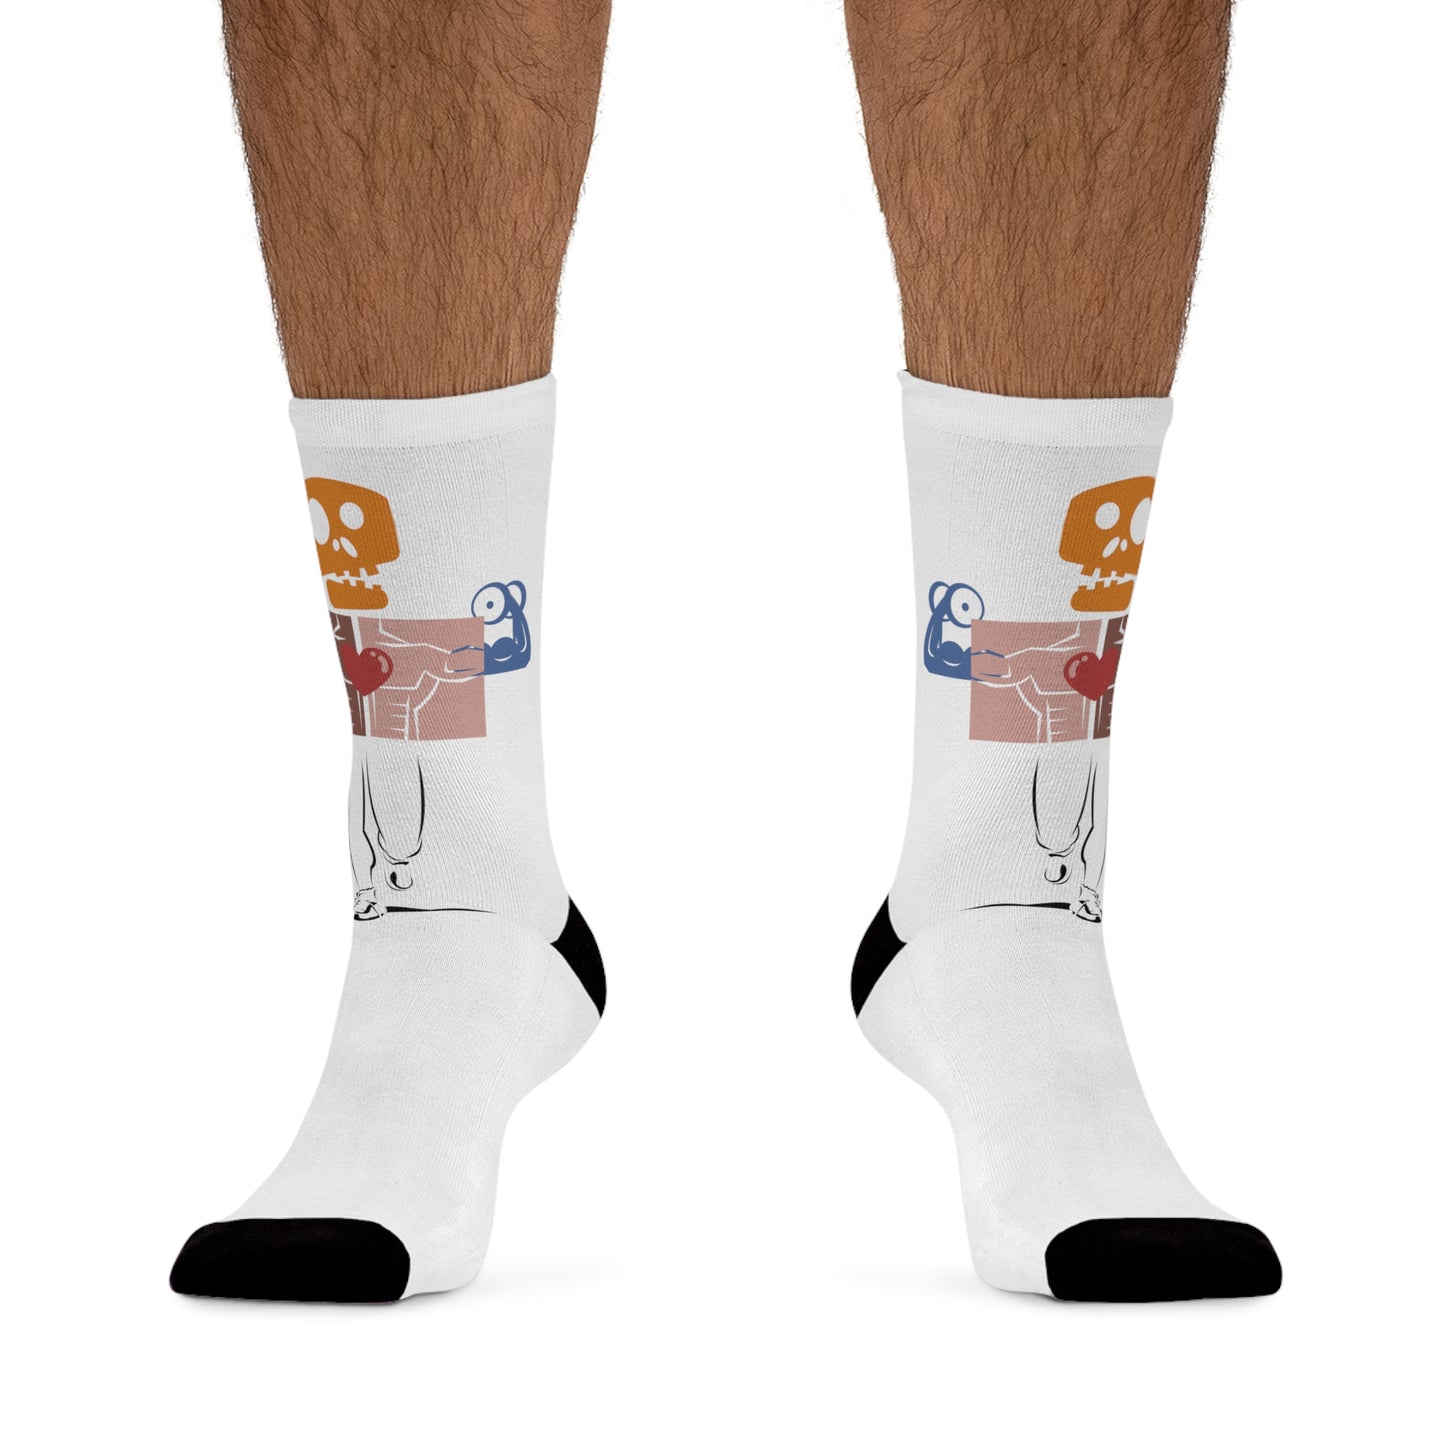 OWNMAN Recycled Poly Socks